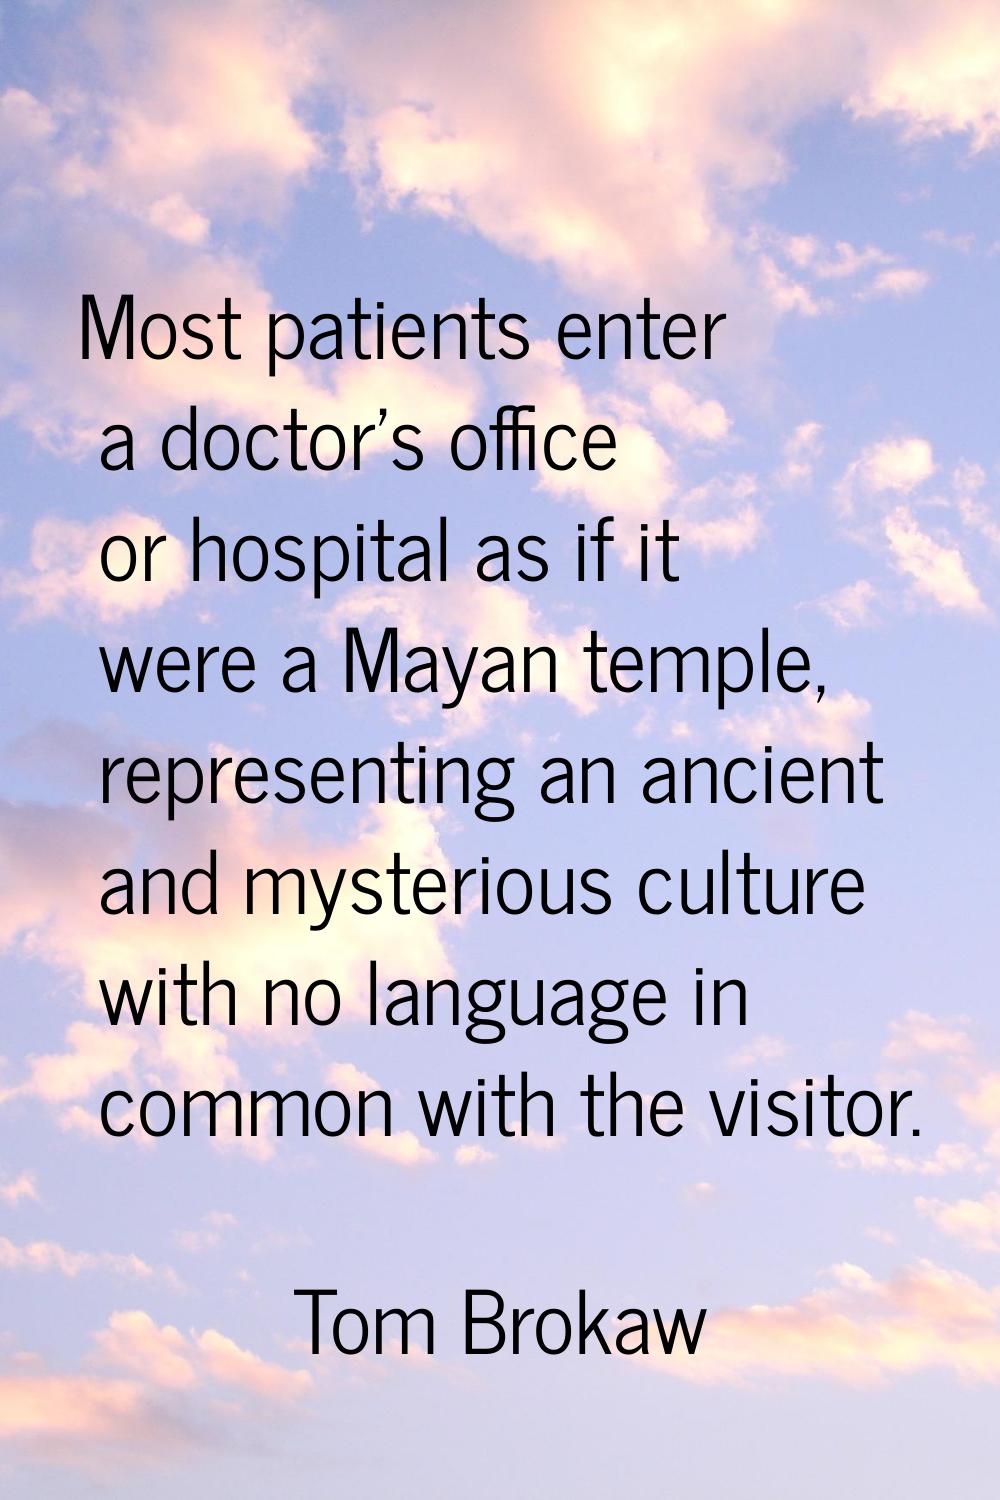 Most patients enter a doctor's office or hospital as if it were a Mayan temple, representing an anc